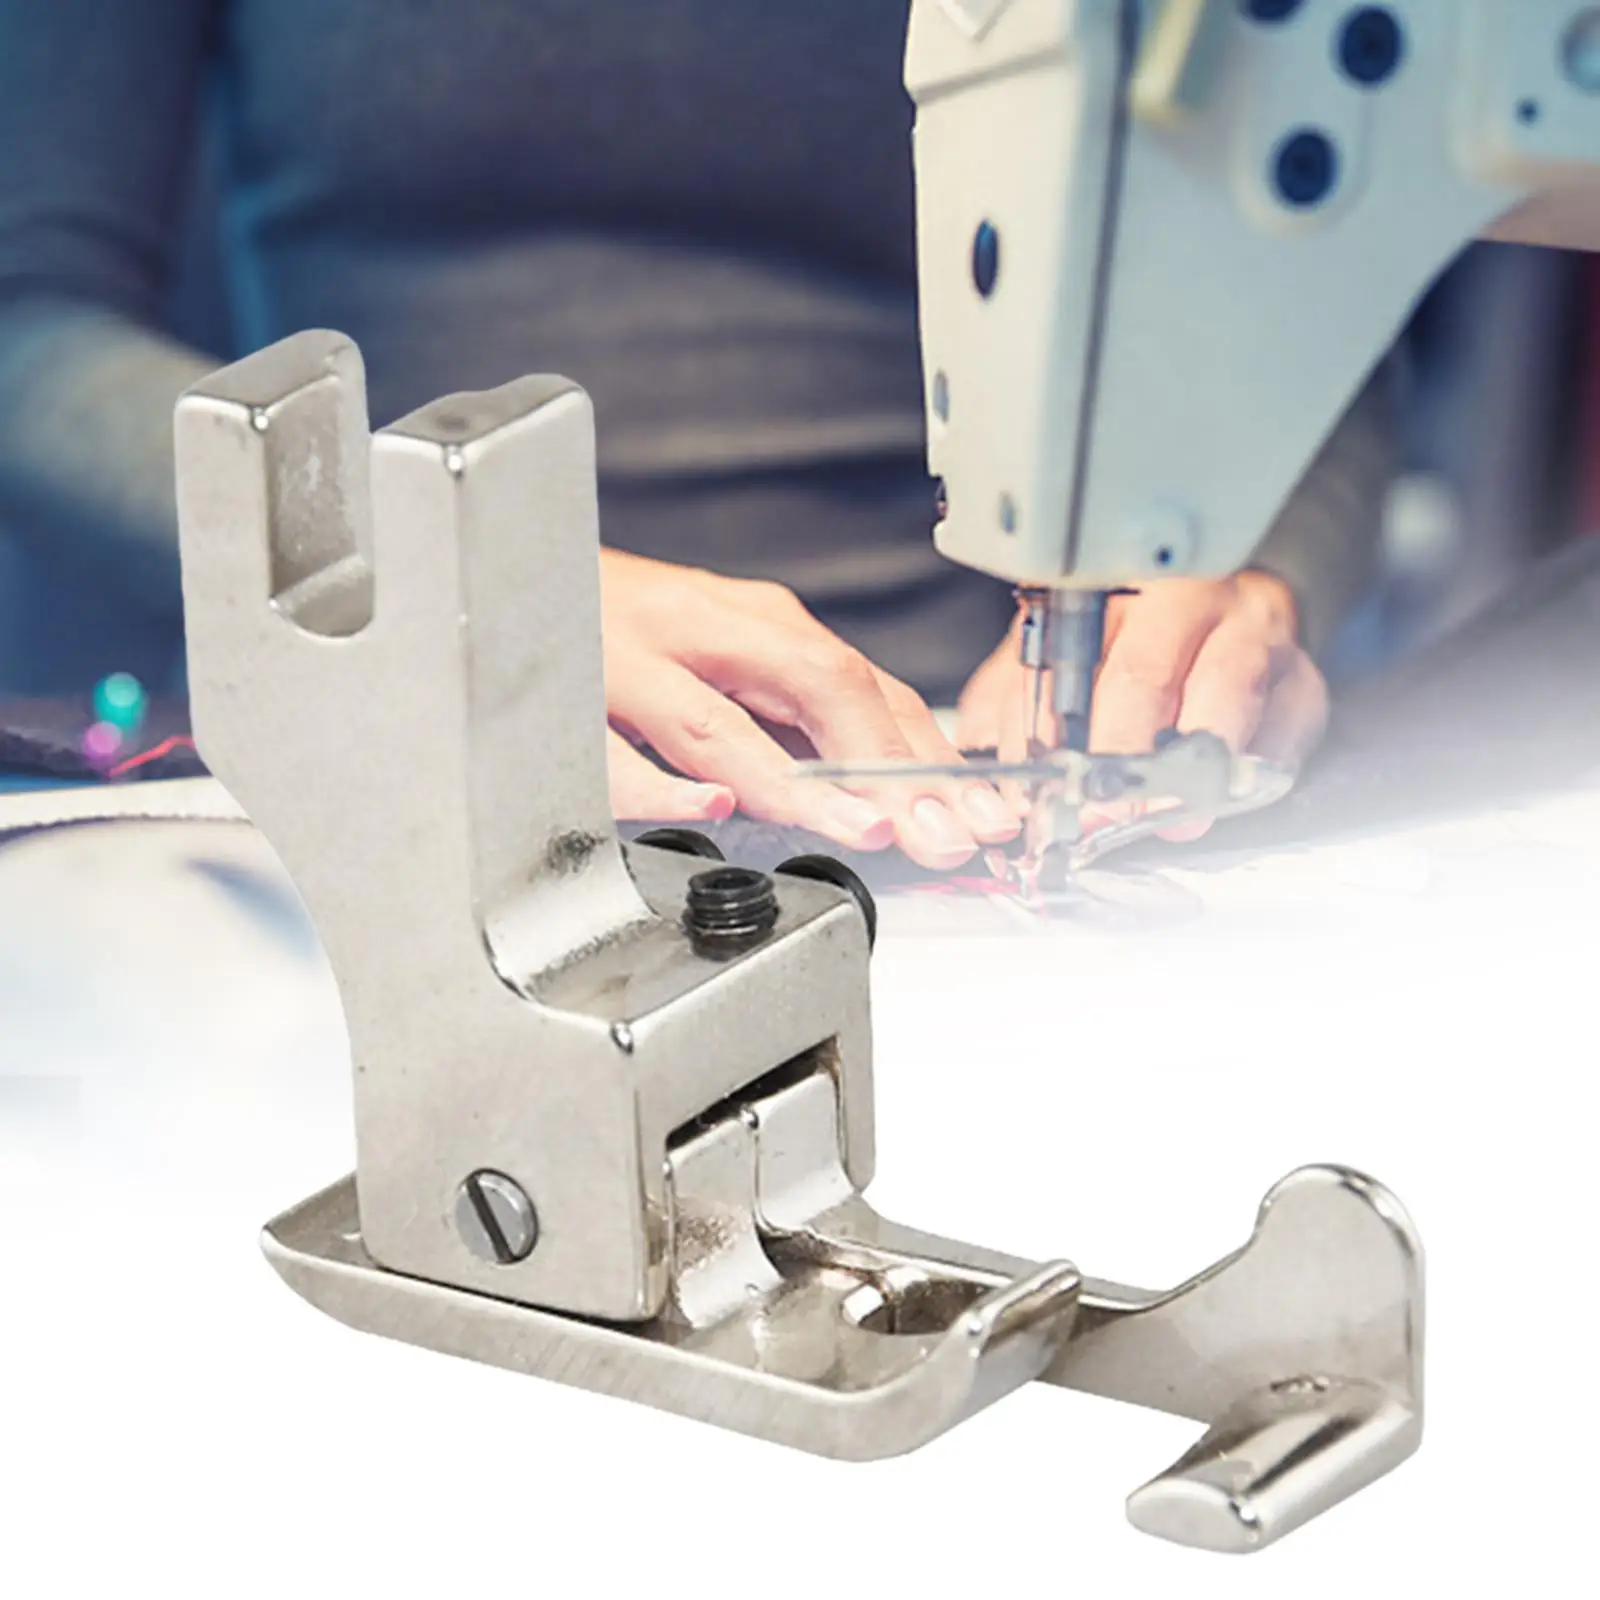 Sewing Machine Presser Foot Steel Straight Stitch Presser Foot for Embroidery Machine Cording Clothes Bag Sewing Sewing Apparel